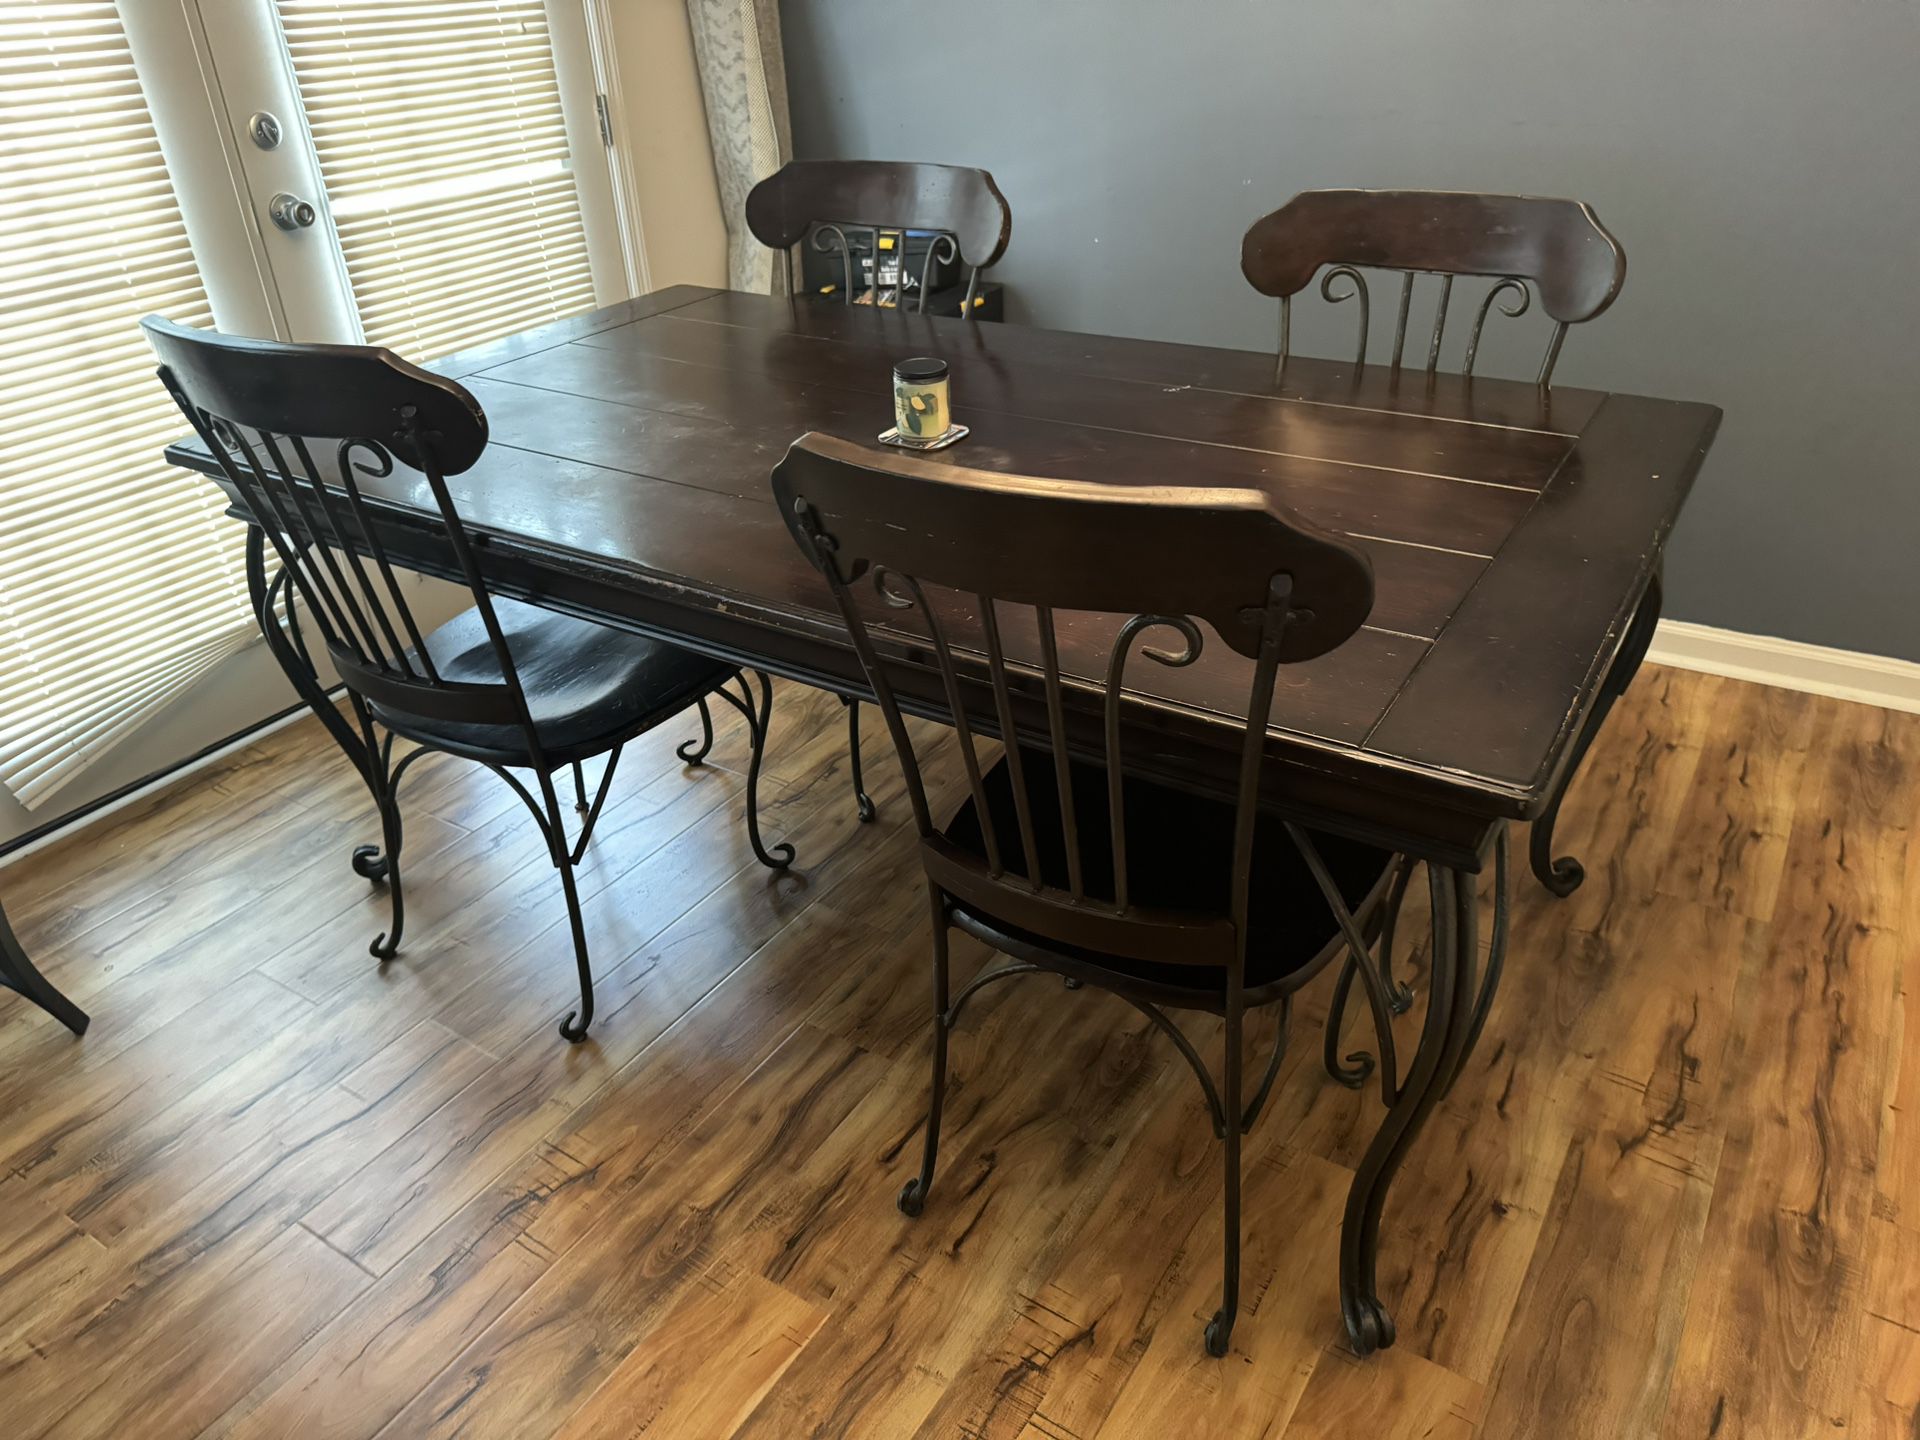 Solid Wood Iron Dinning Table With Storage Option